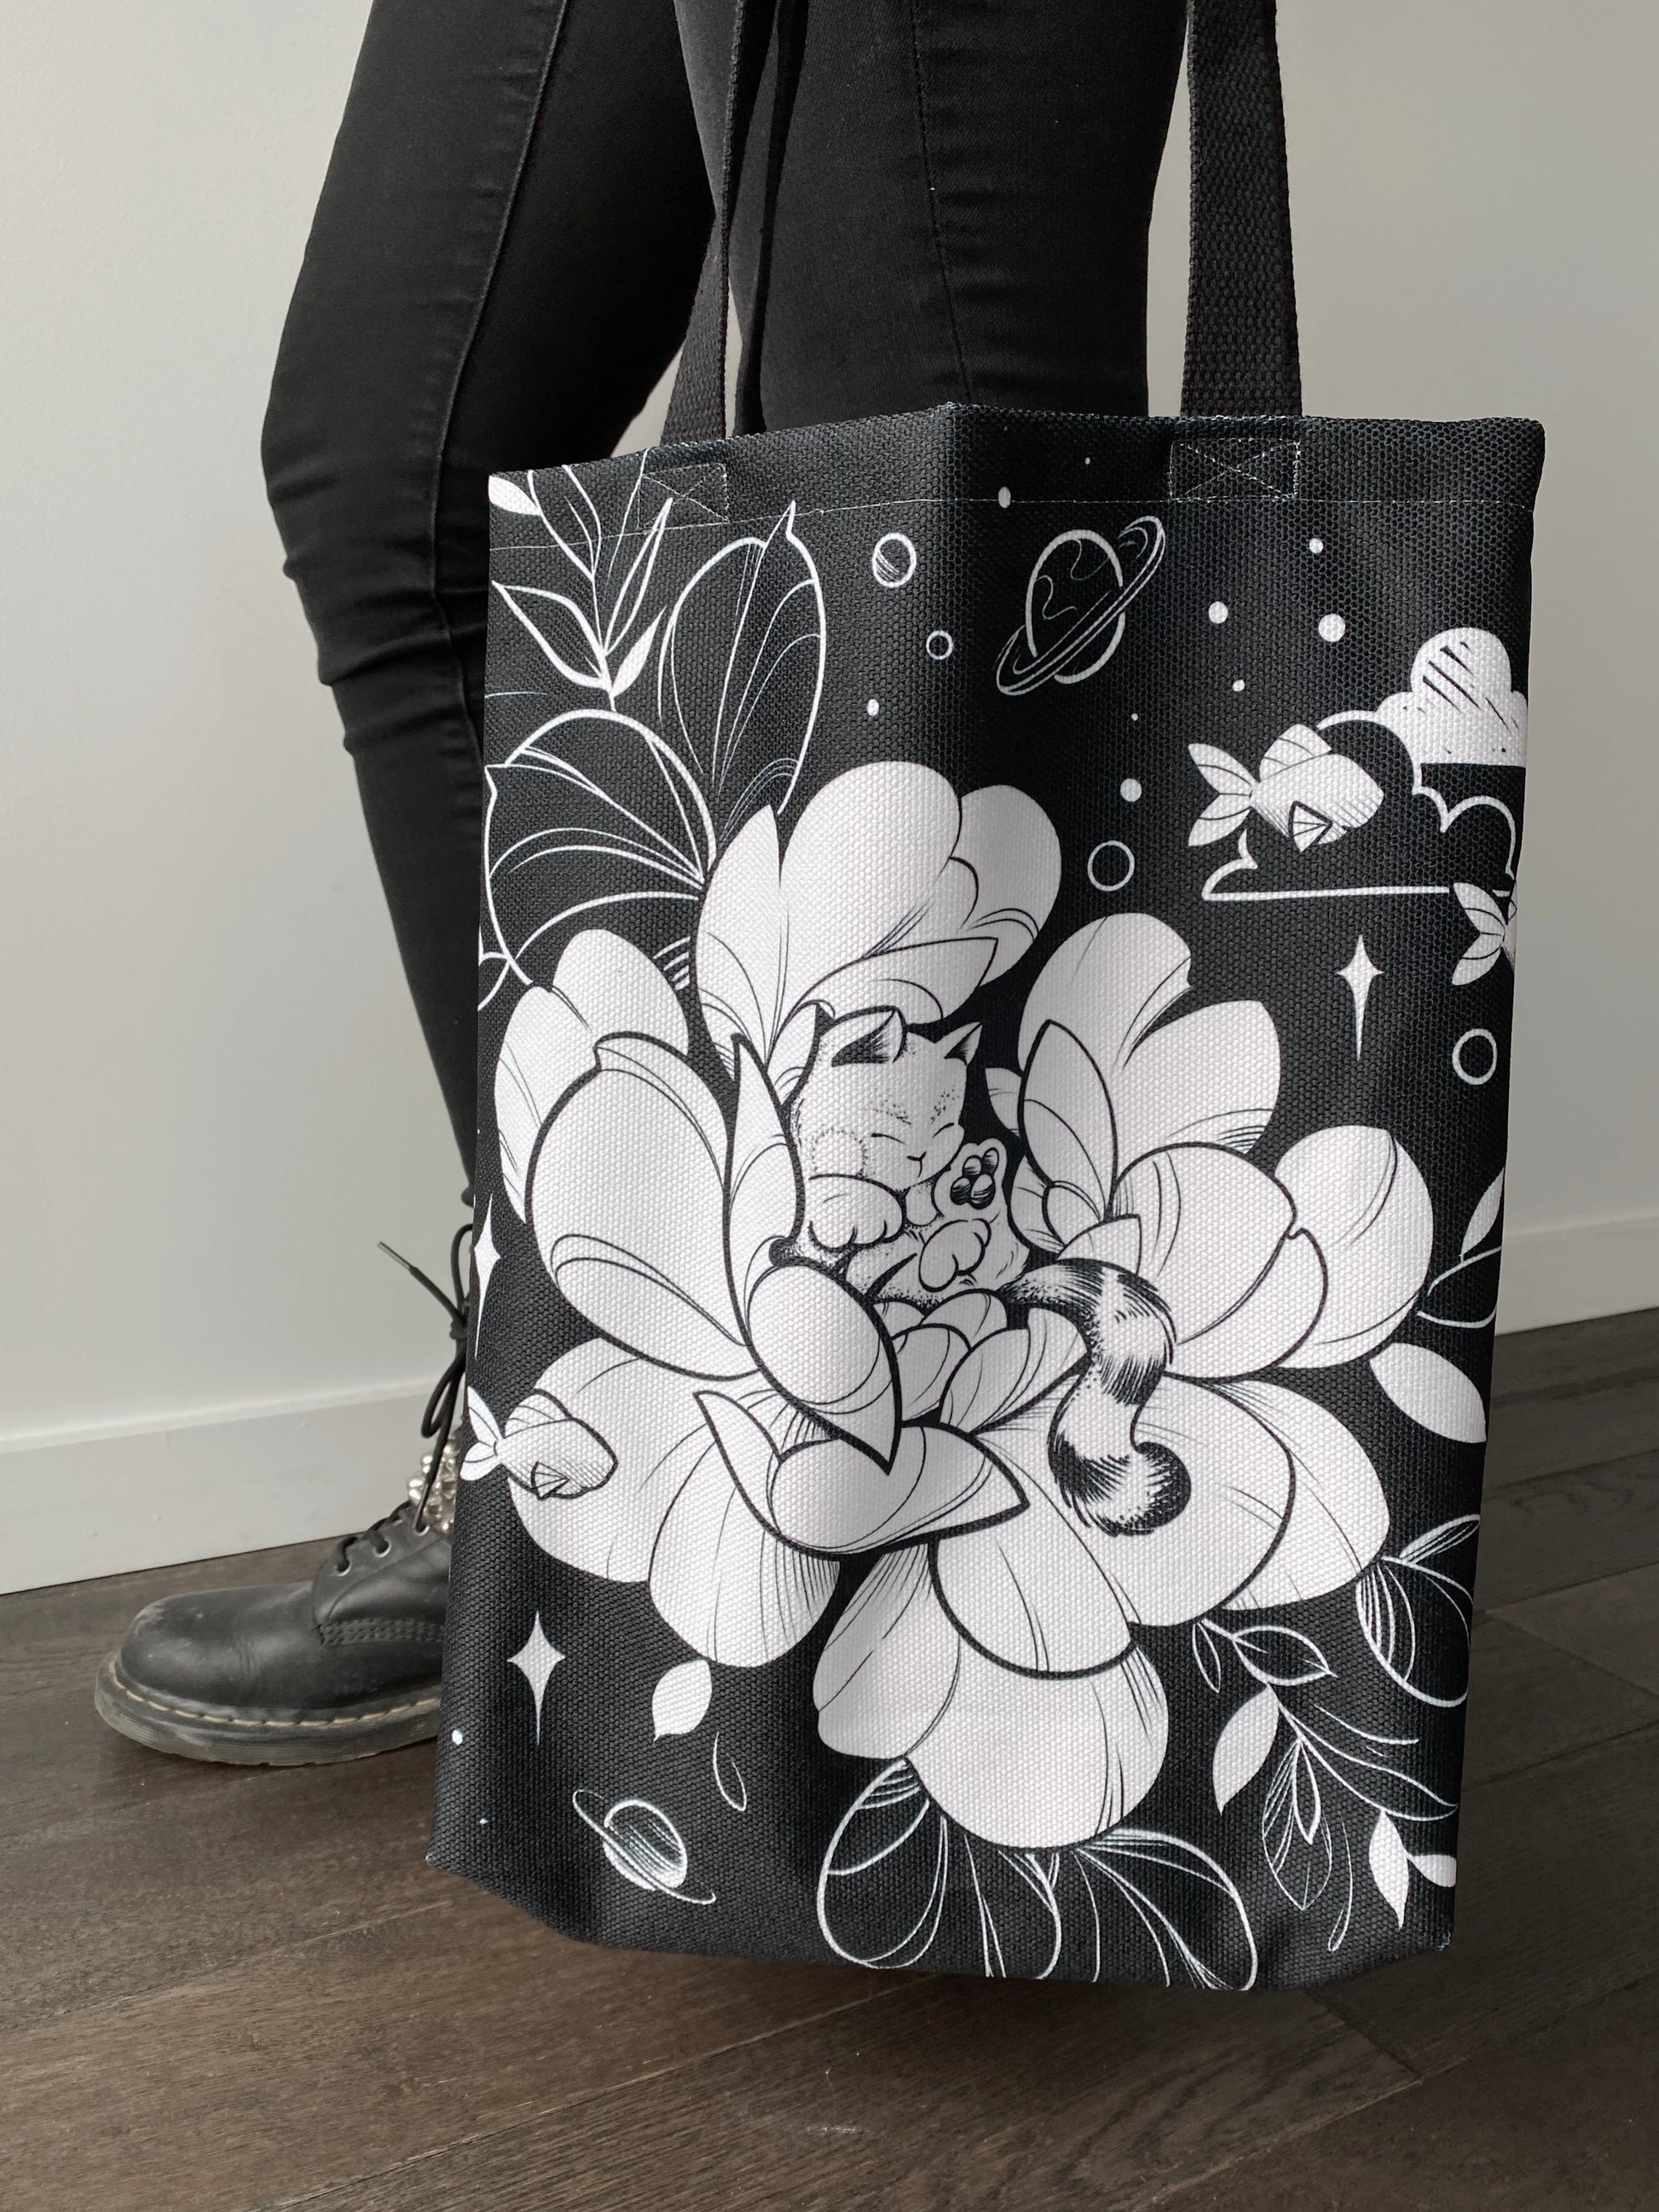 Always dreaming cat and flower tote design in black line work and shading, illustrated by female floral tattoo artist Lu Loram Martin, Toronto, Canada